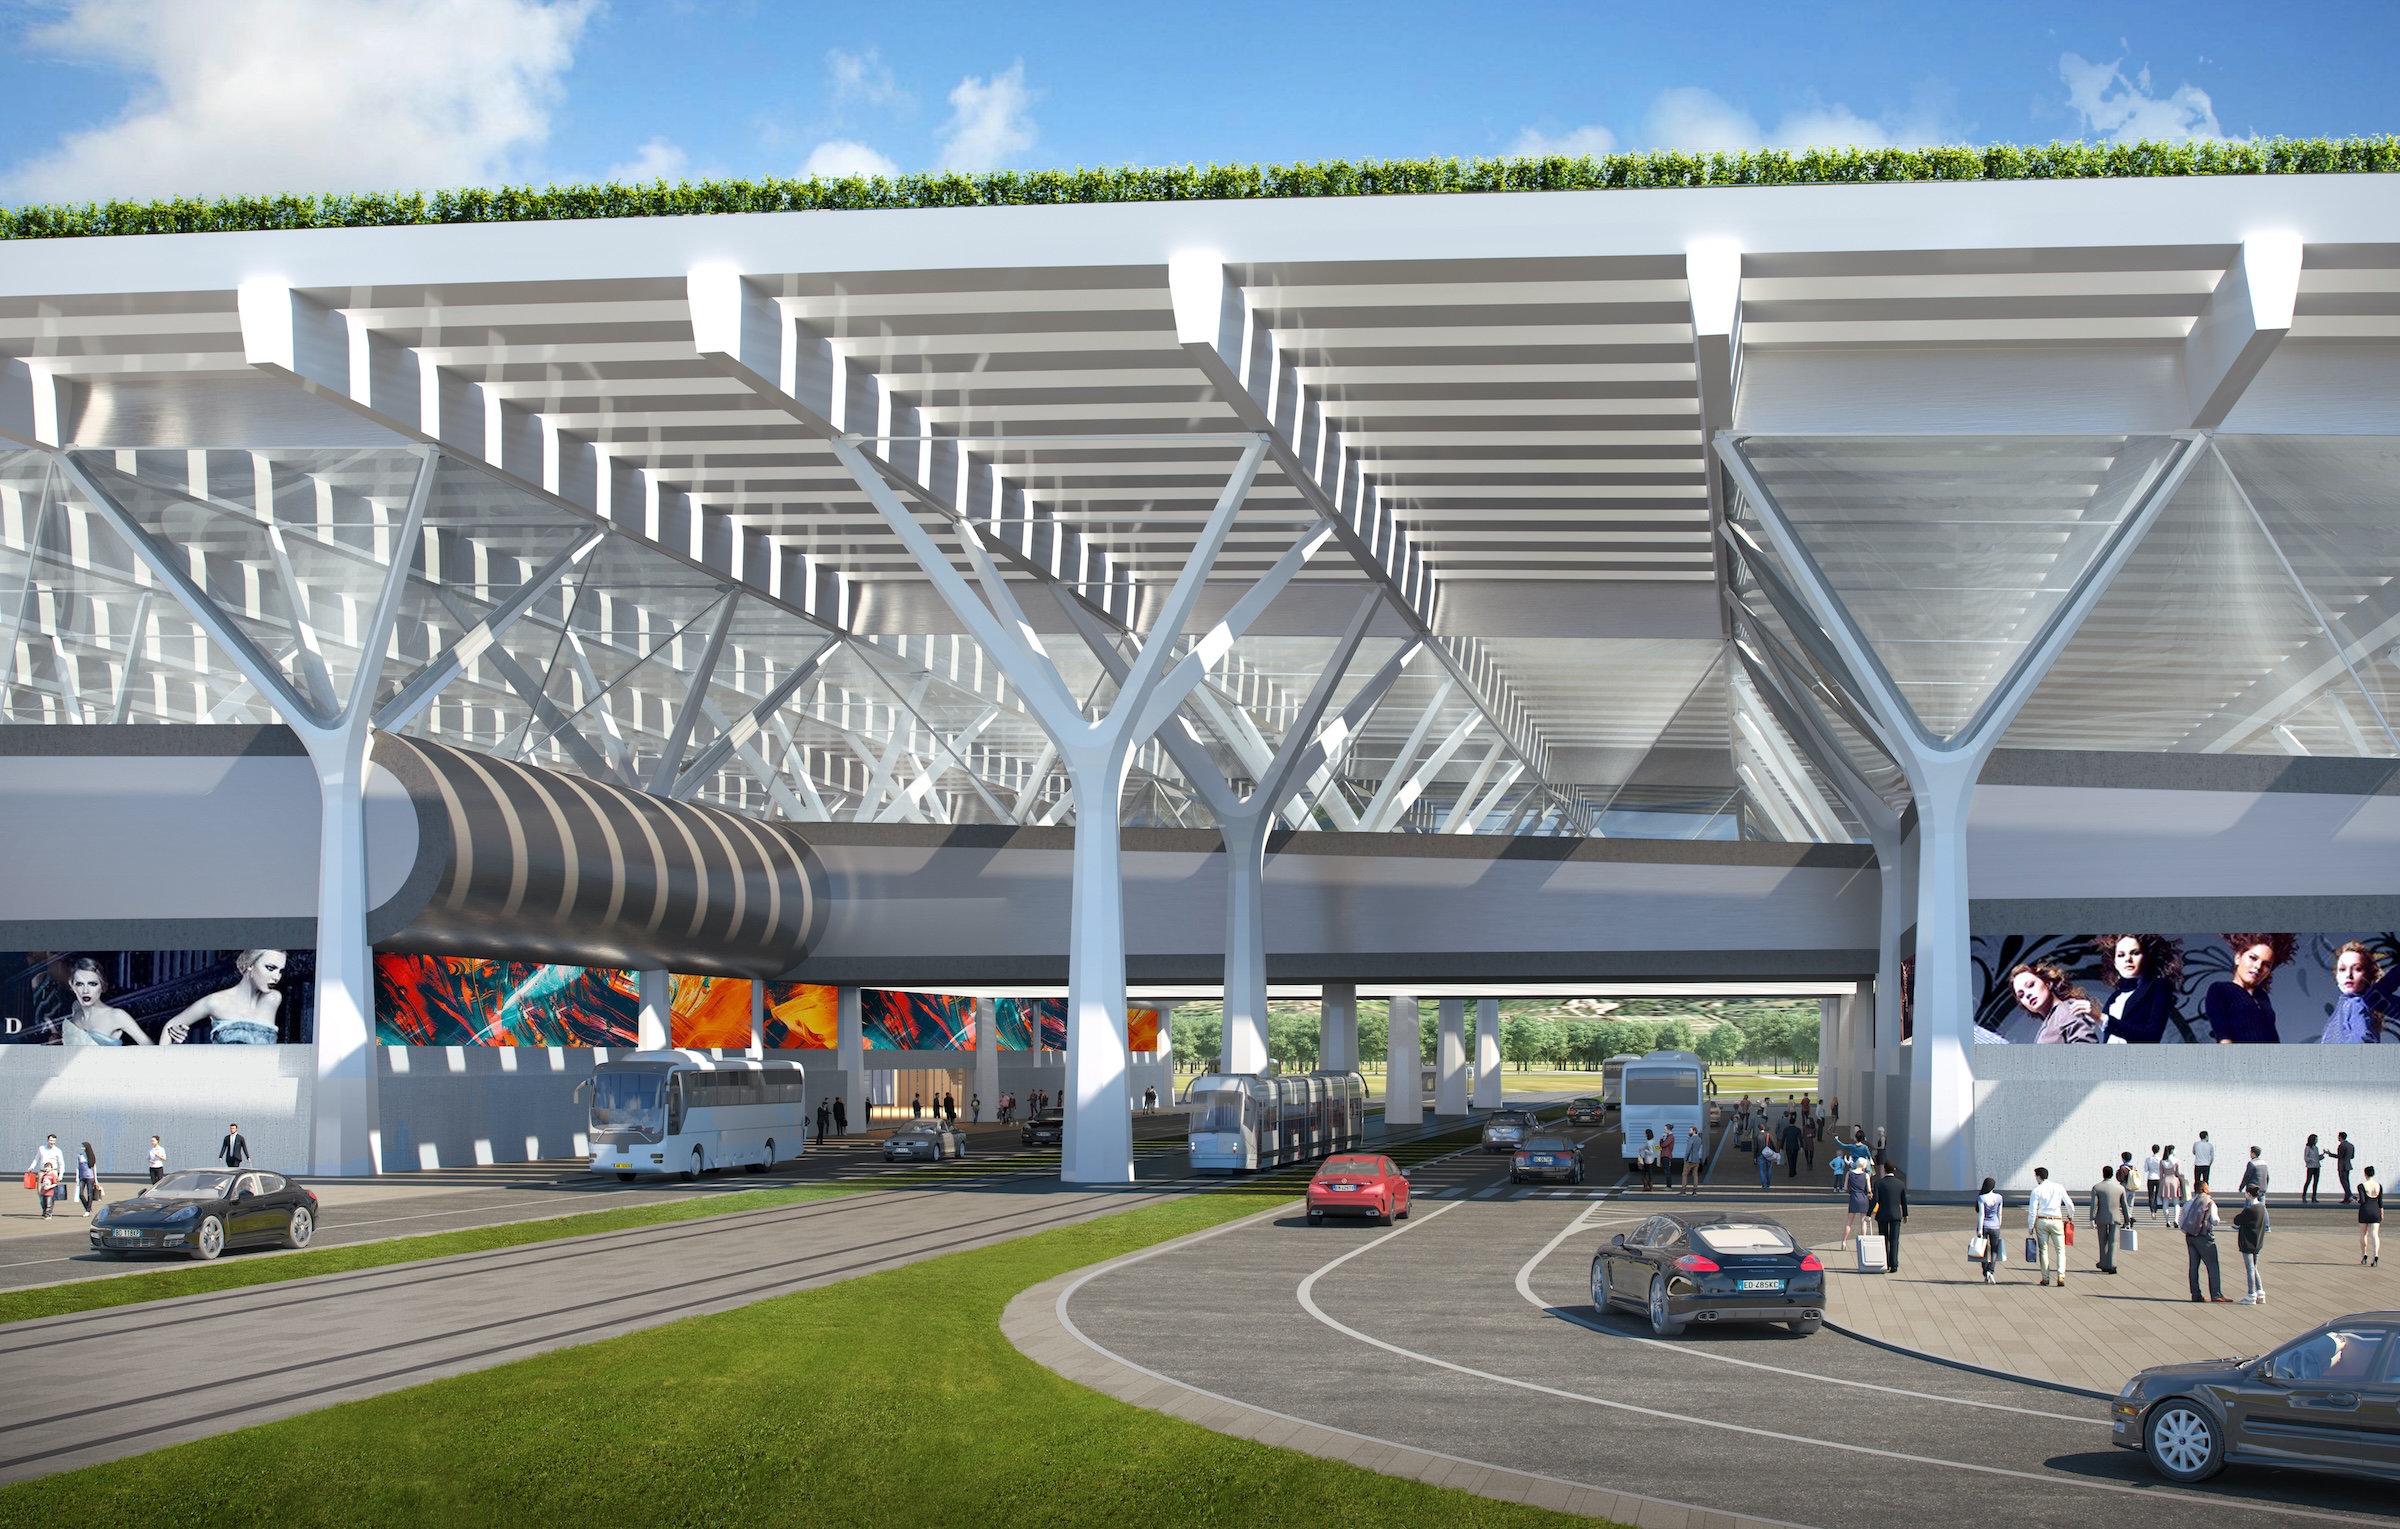 Rafael Viñoly Architects’ design for the new Florence, Italy, airport terminal will feature a rooftop vineyard